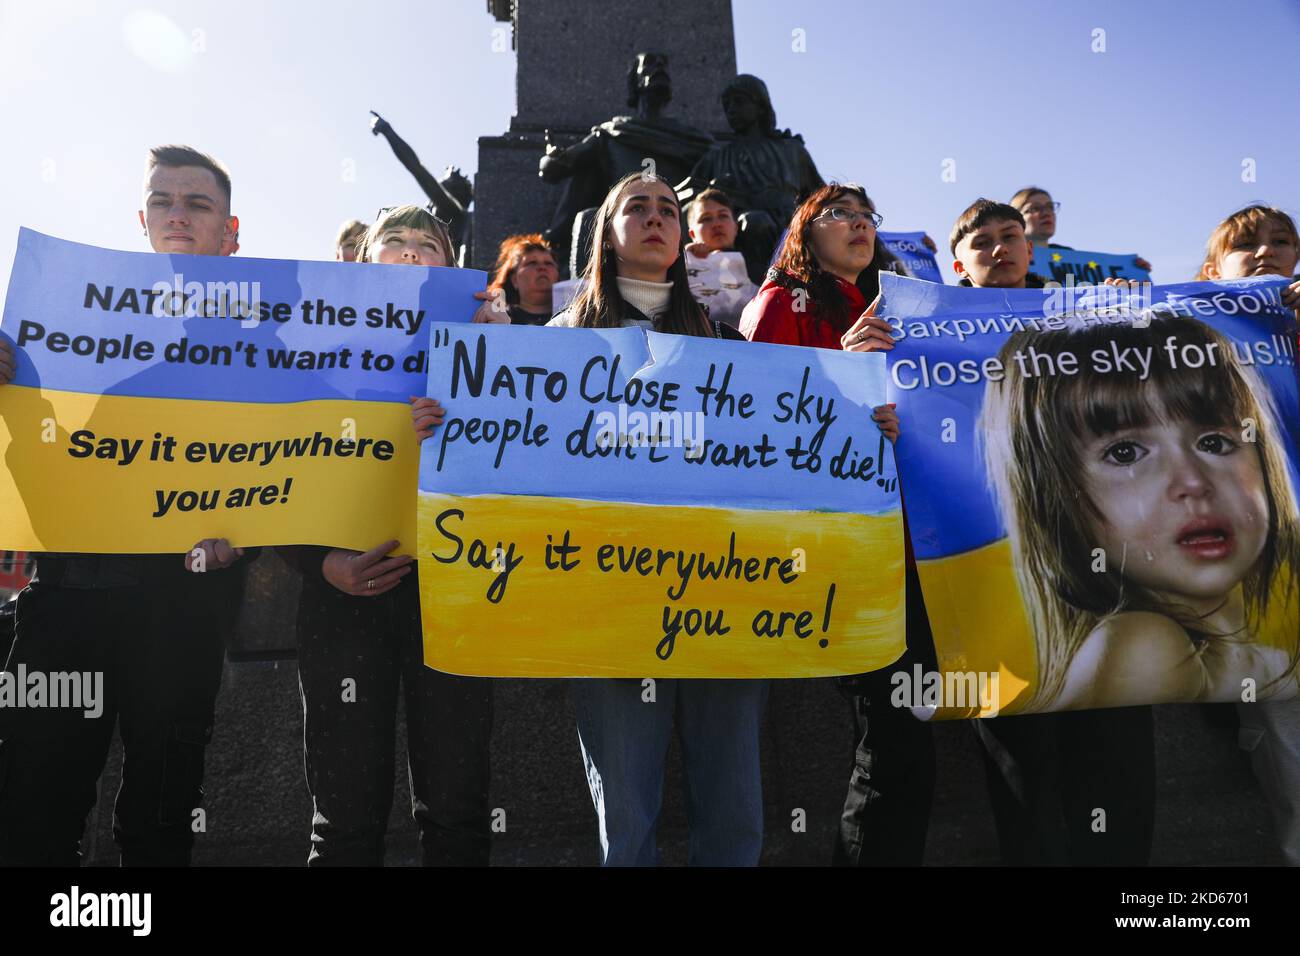 Ukrainian citizens and supporters attend a demonstration of solidarity with Ukraine demanding NATO to close the sky for Russian planes over the territory of Ukraine following Russian invasion. Krakow, Poland on March 27, 2022. (Photo by Beata Zawrzel/NurPhoto) Stock Photo